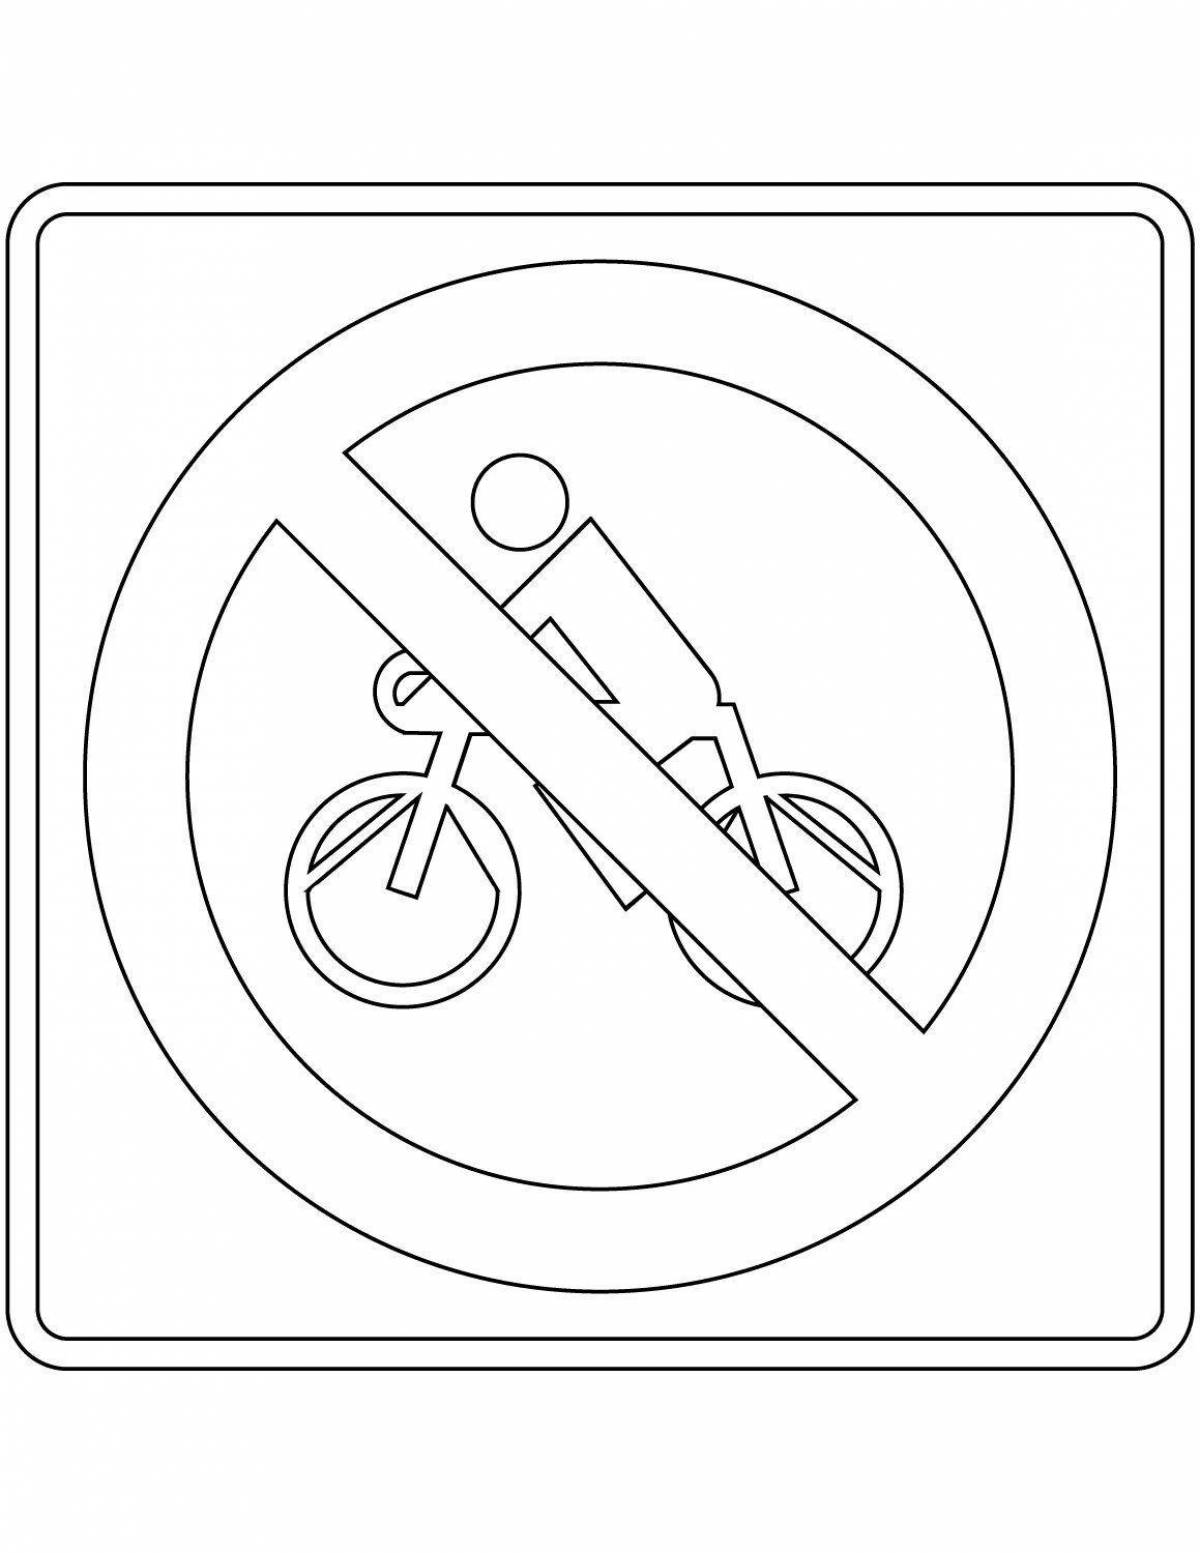 Coloring page radiant no pedestrian traffic sign